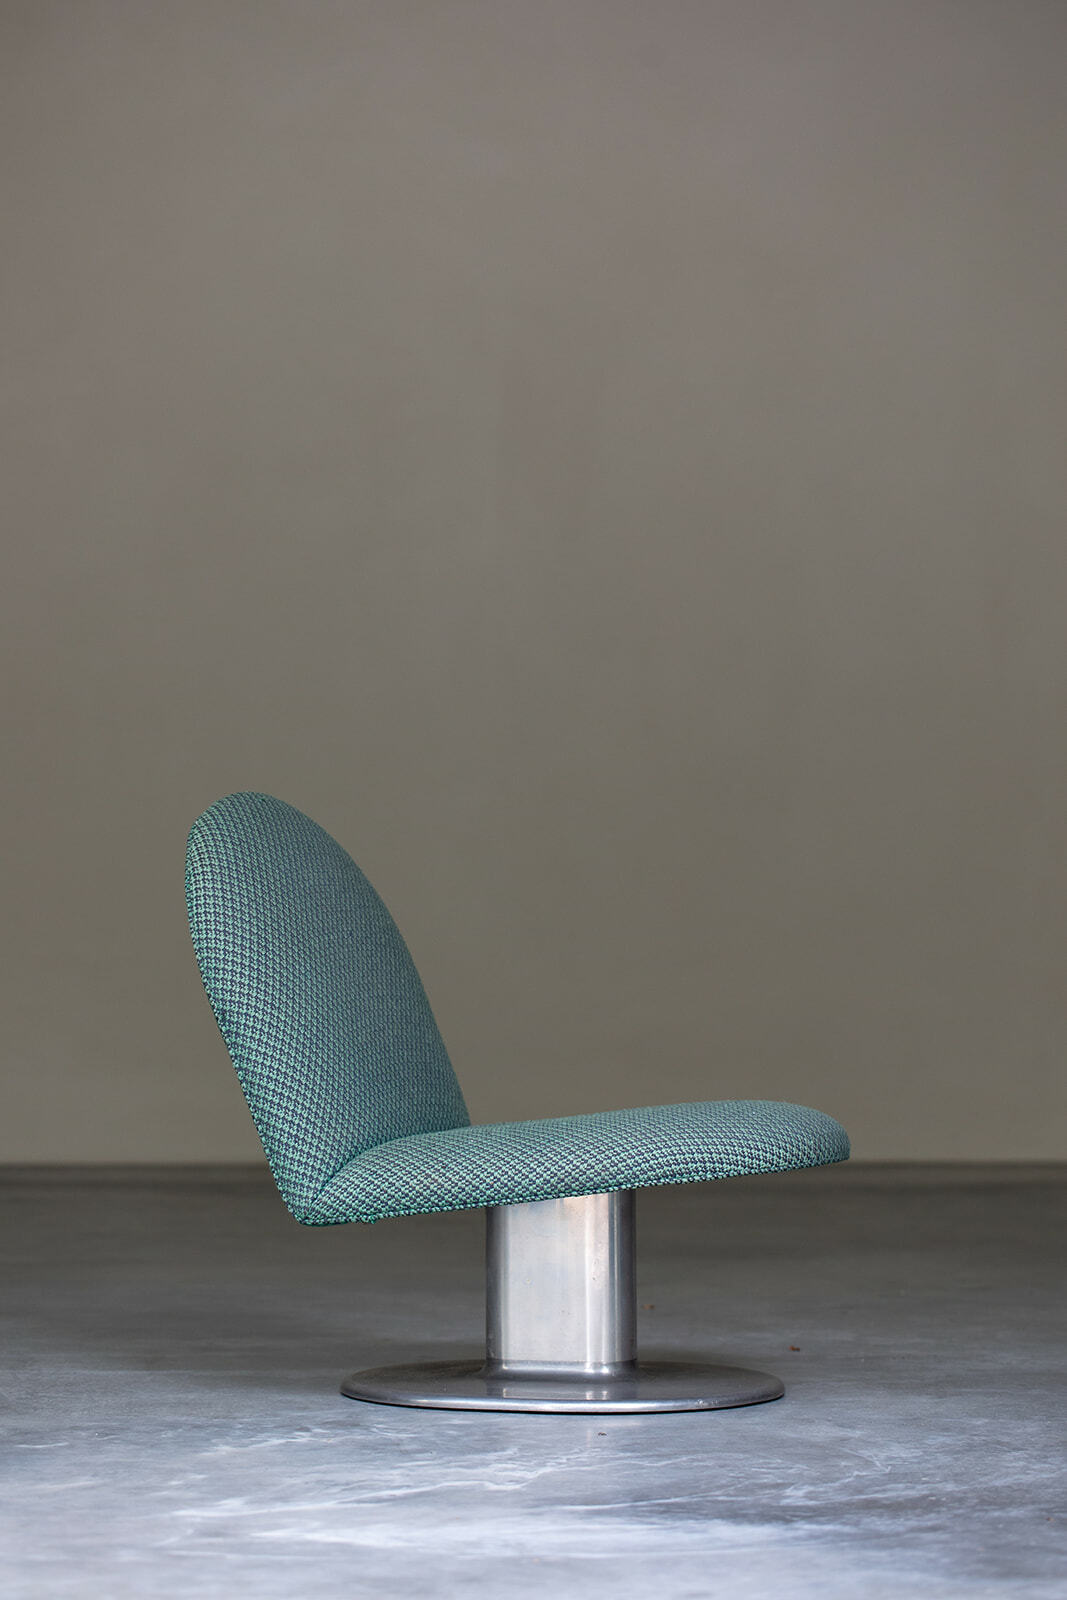 Ettore Sottsass 'Harlow' low chair for Poltronova